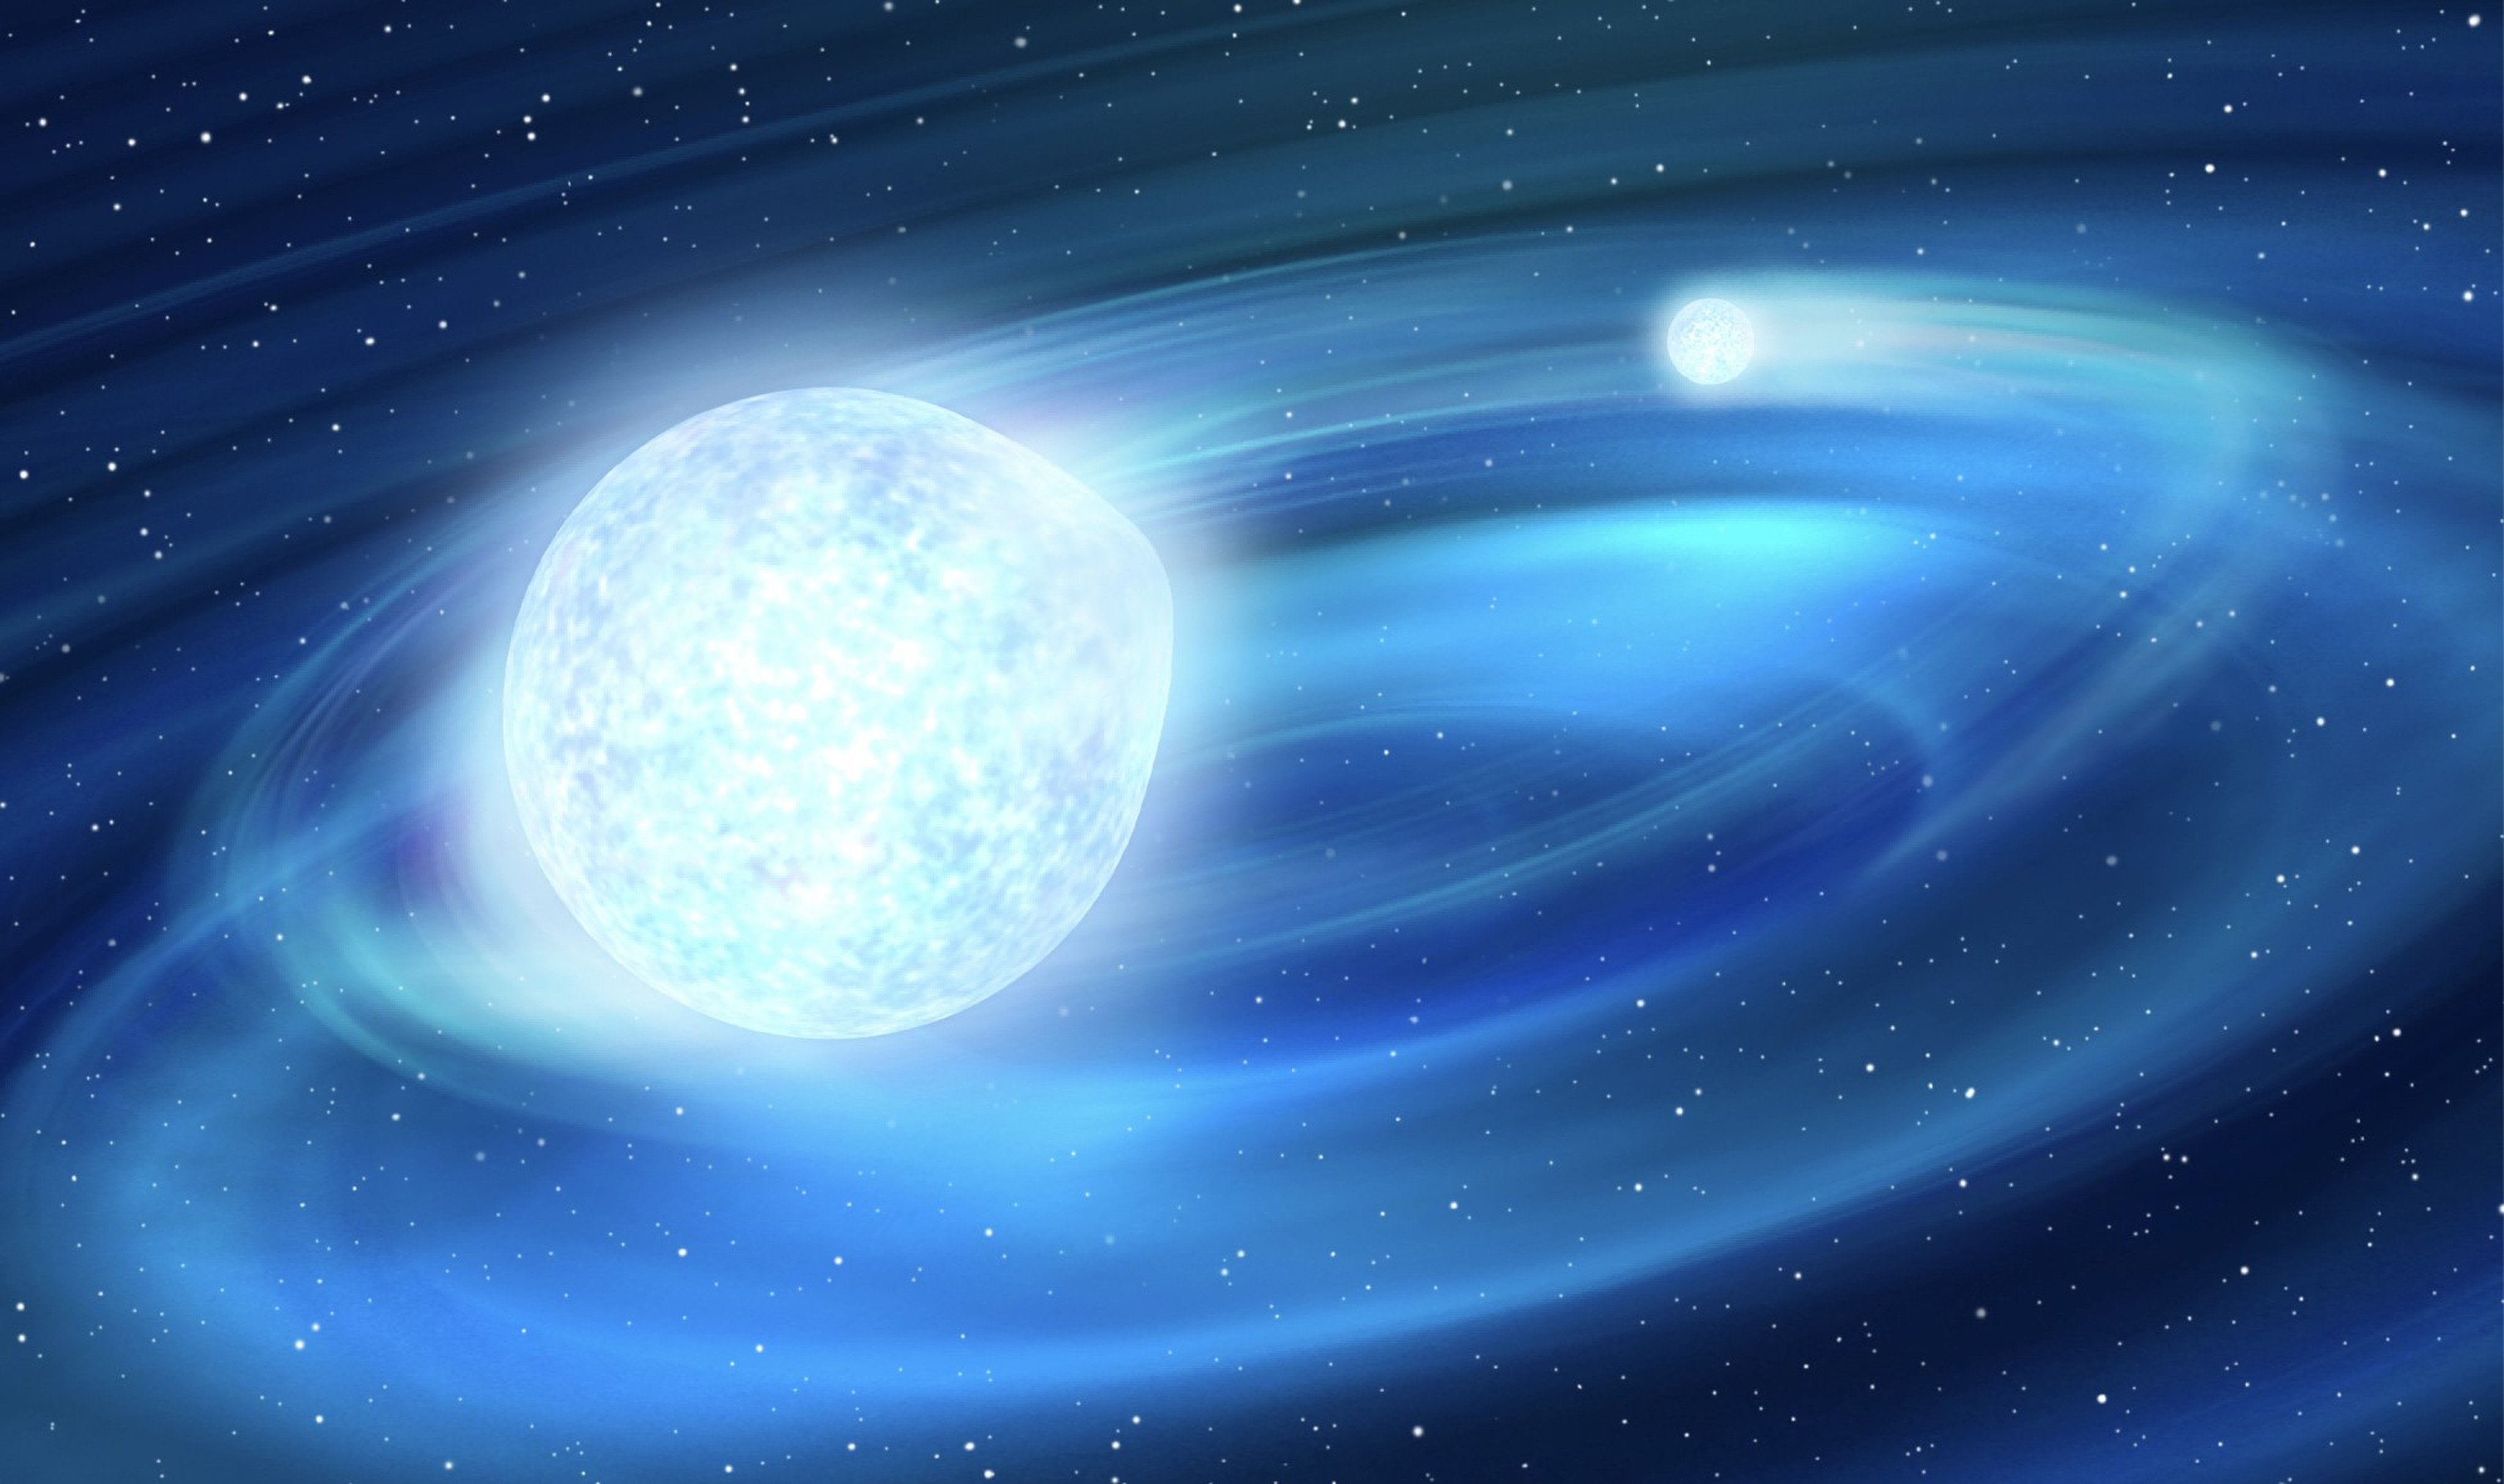 An artist’s impression of the binary star system detected by an international team led by researchers at Tsinghua University in China. Illustration: Beijing Planetarium